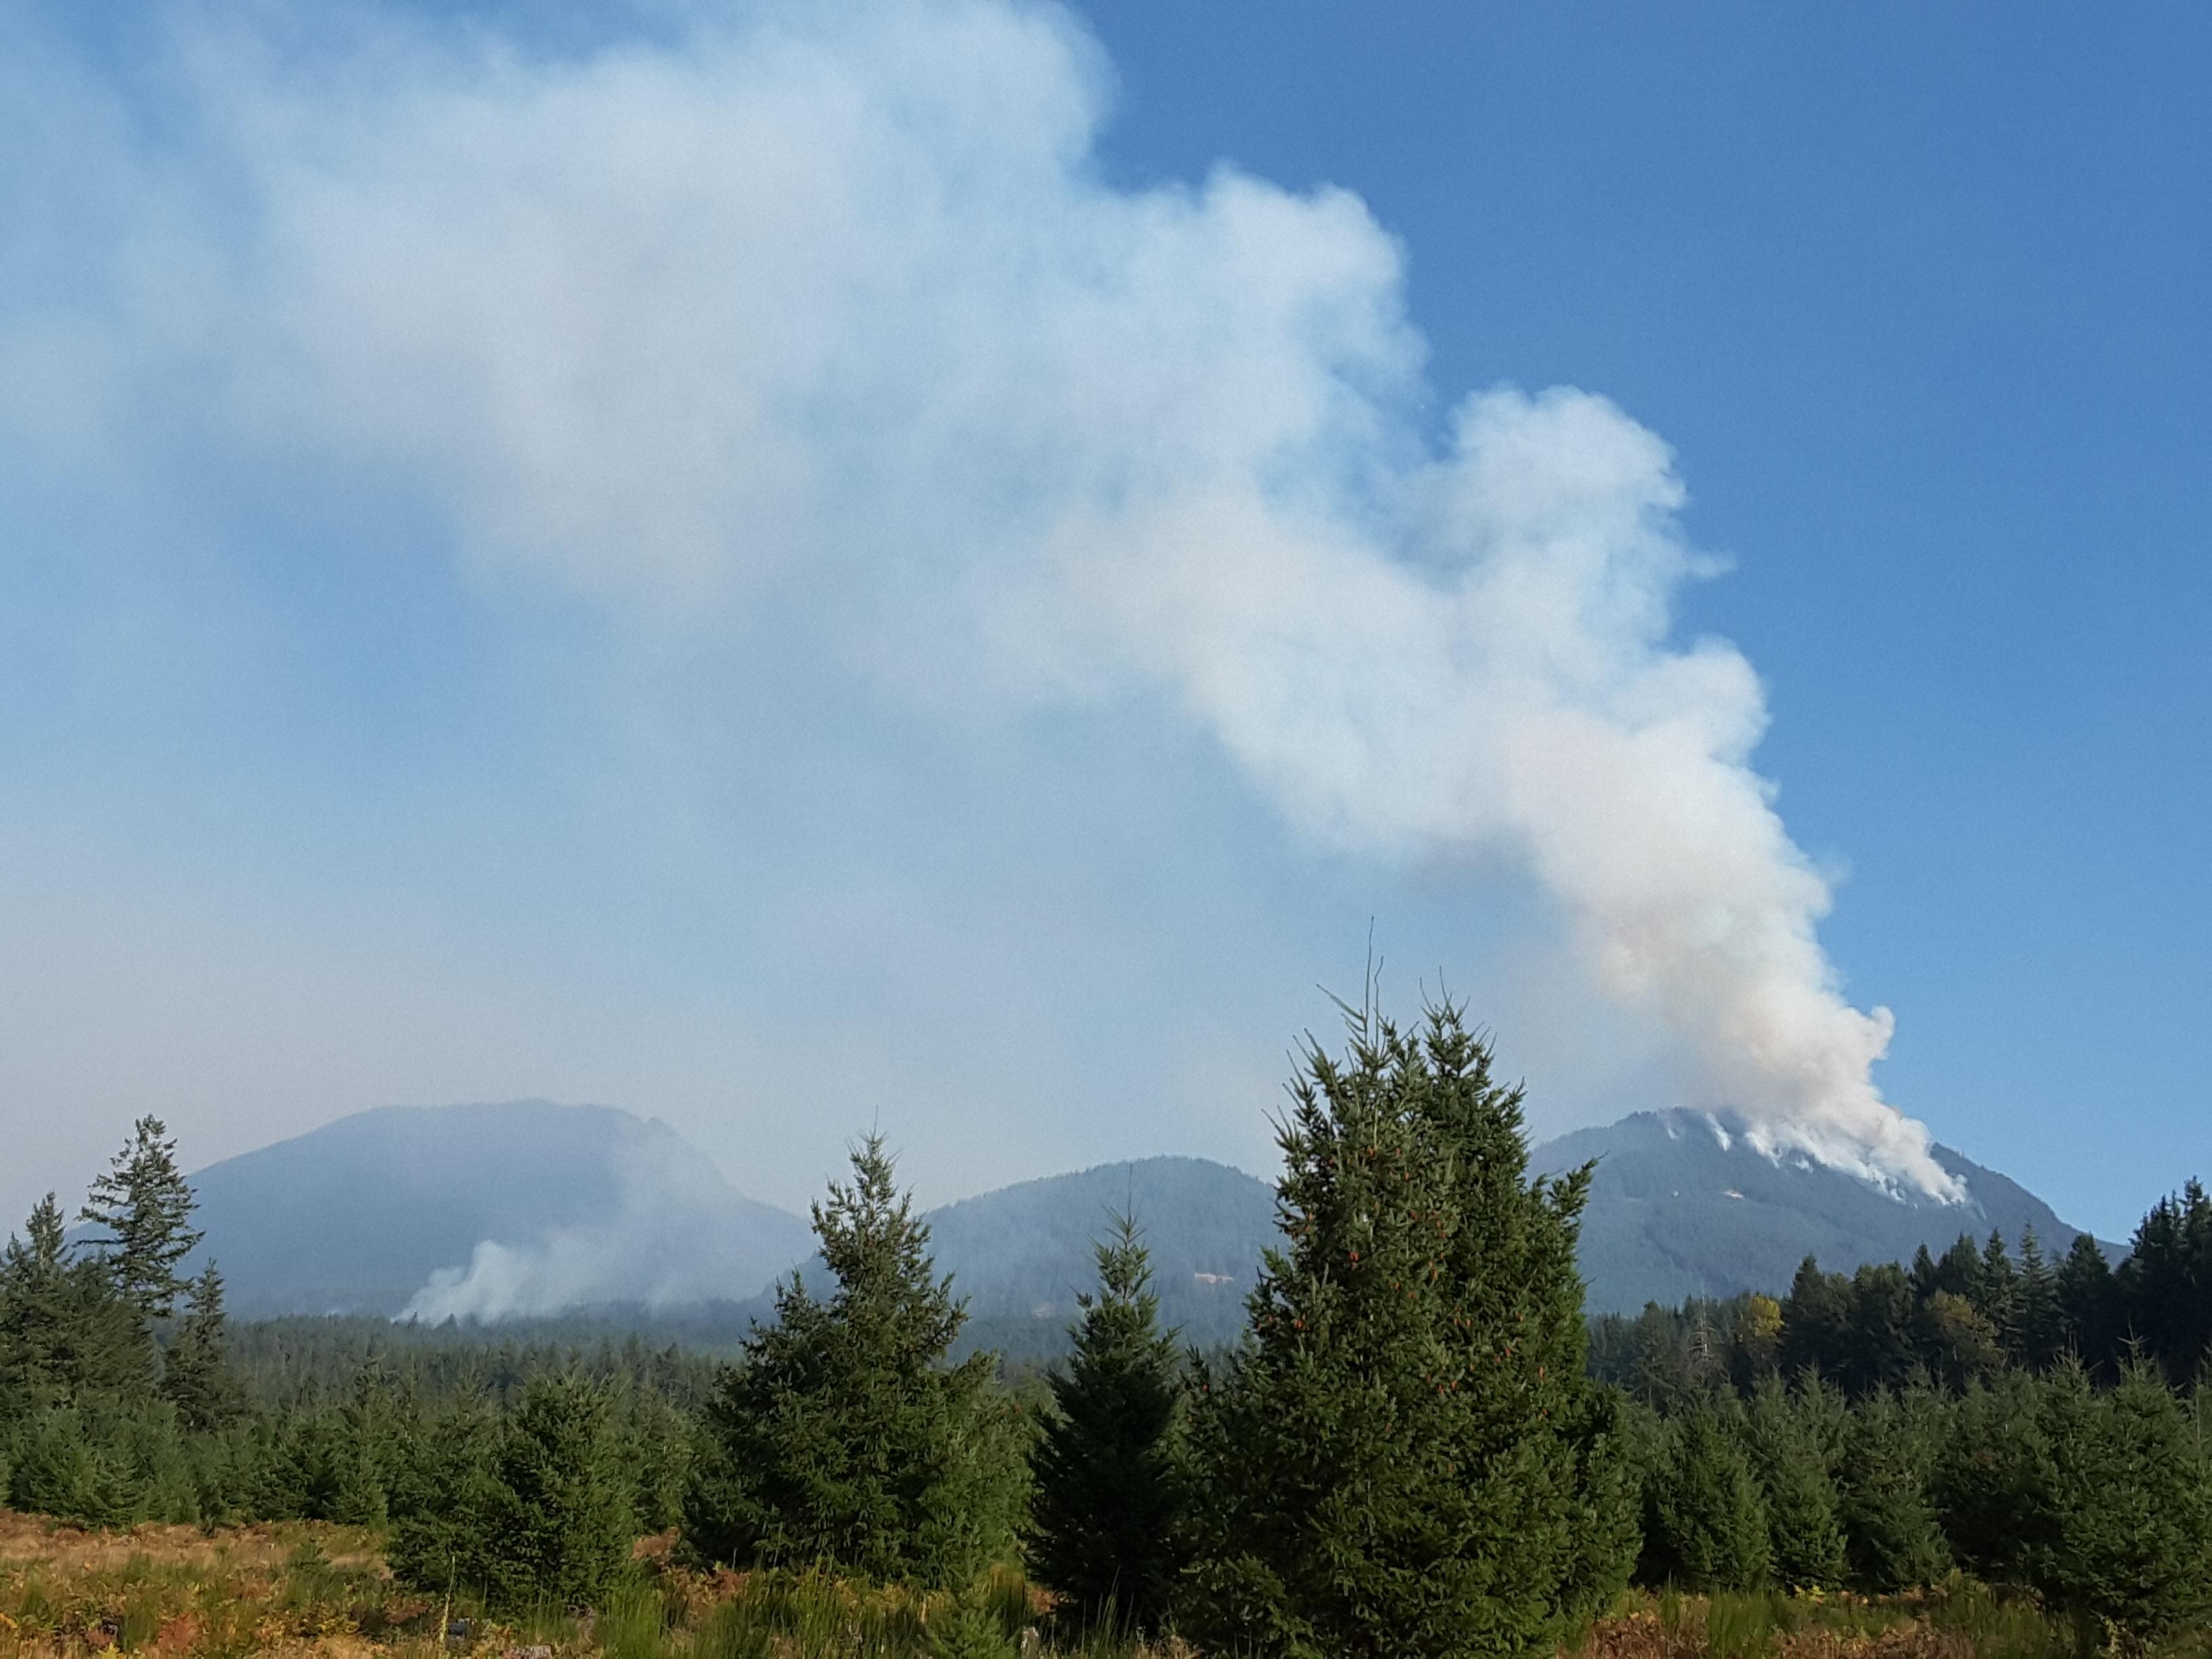 Smoke from the Goat Rocks Fire rises from a steep, forested slope near Three Peaks ridge on the right side of the photo. A lesser amount of smoke rises from the forest near the left side of the photo, in the Coal Creek drainage.